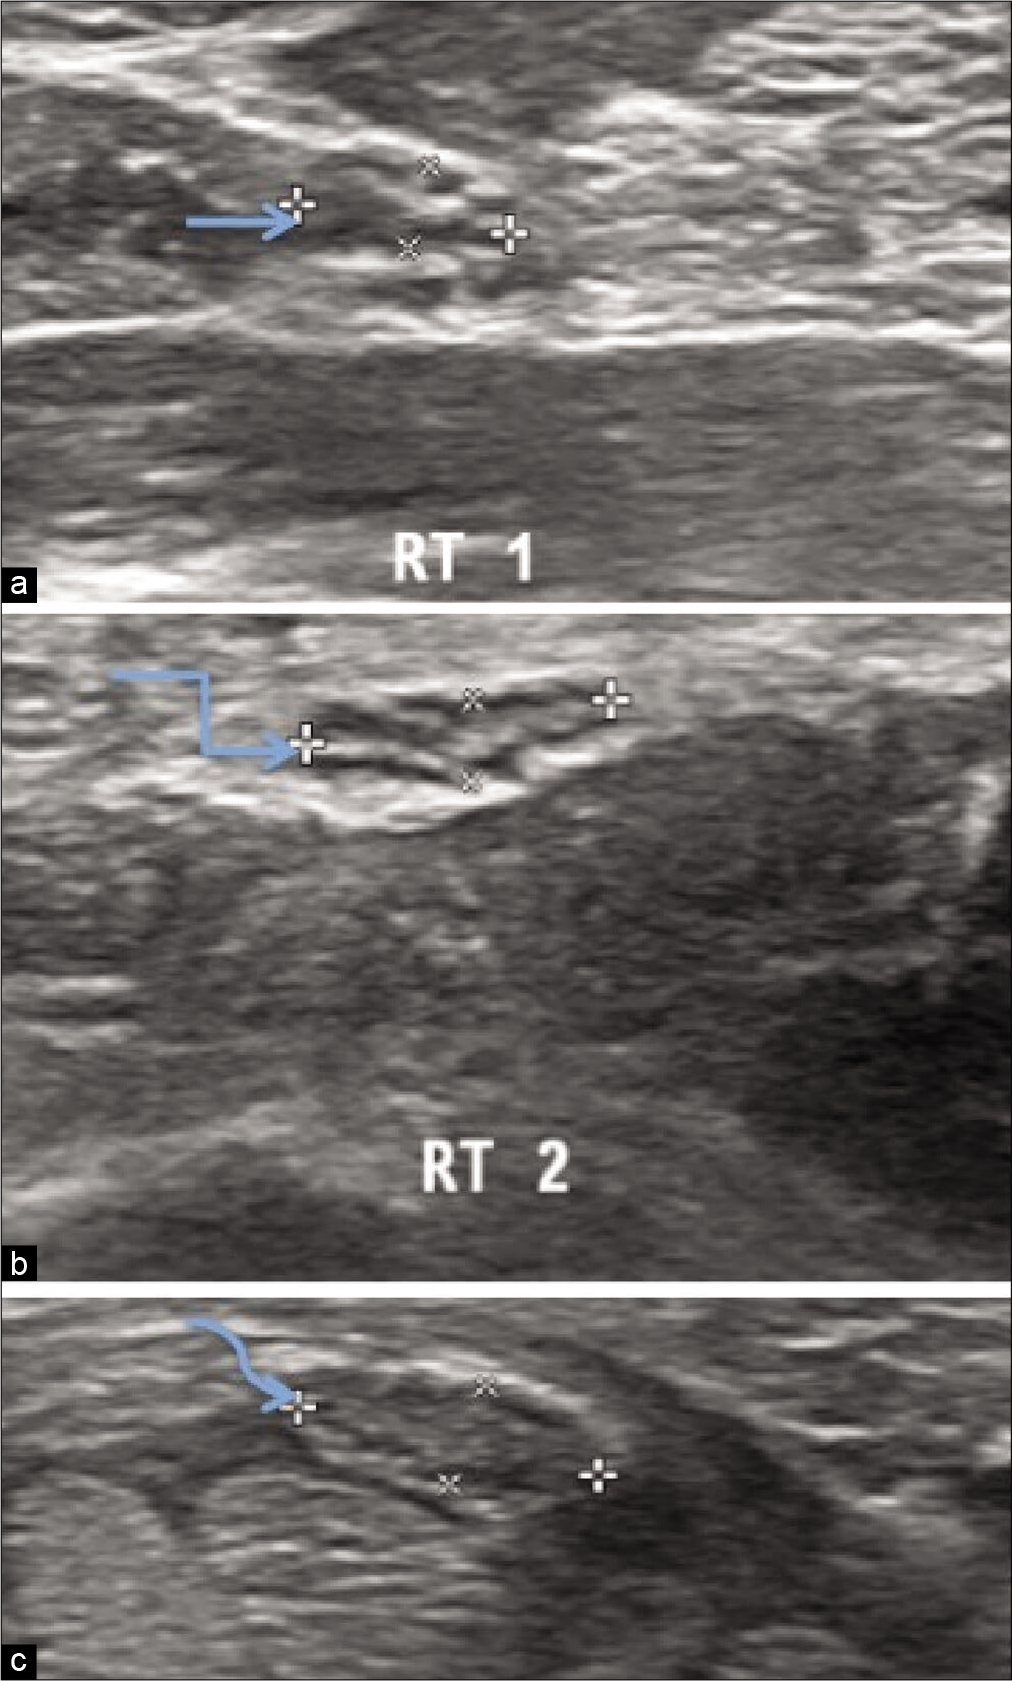 Ultrasonography of the Right median nerve of hypothyroidism patient showing thickness /width ratio at three levels in distal forearm (a) thickness/width ratio 2.59 at the level of pronator quadratus,(straight arrow) (b) thickness/width ratio 3.23 proximal to carpal tunnel inlet, (bent arrow) (c) thickness/width ratio 2.75 distal to carpal tunnel outlet.(curved arrow).